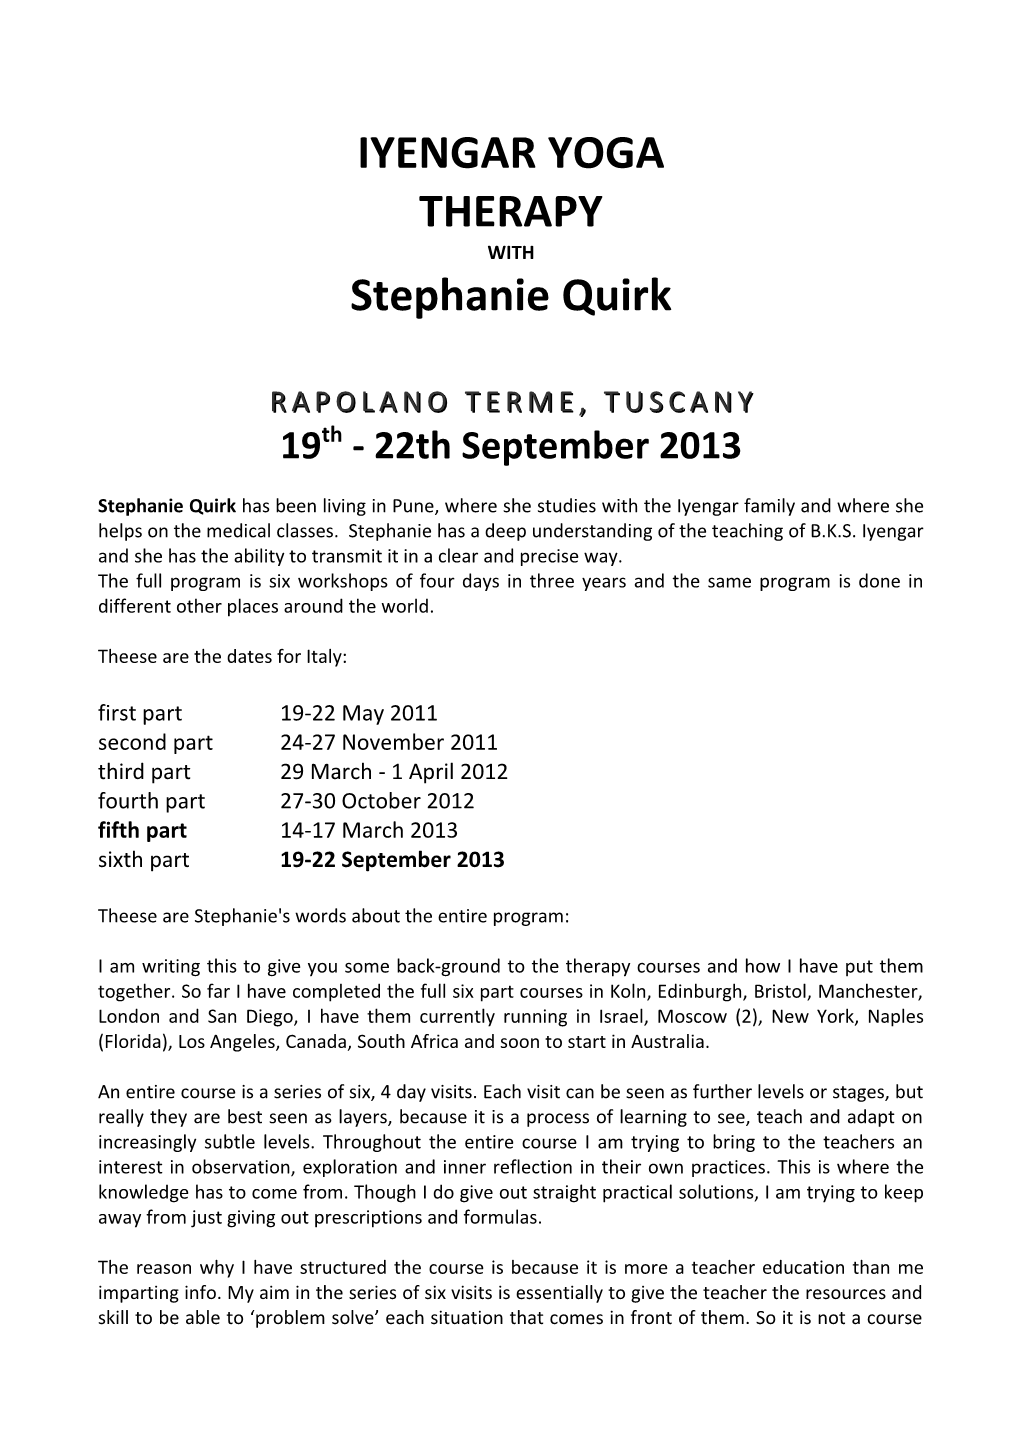 IYENGAR YOGA THERAPY with Stephanie Quirk